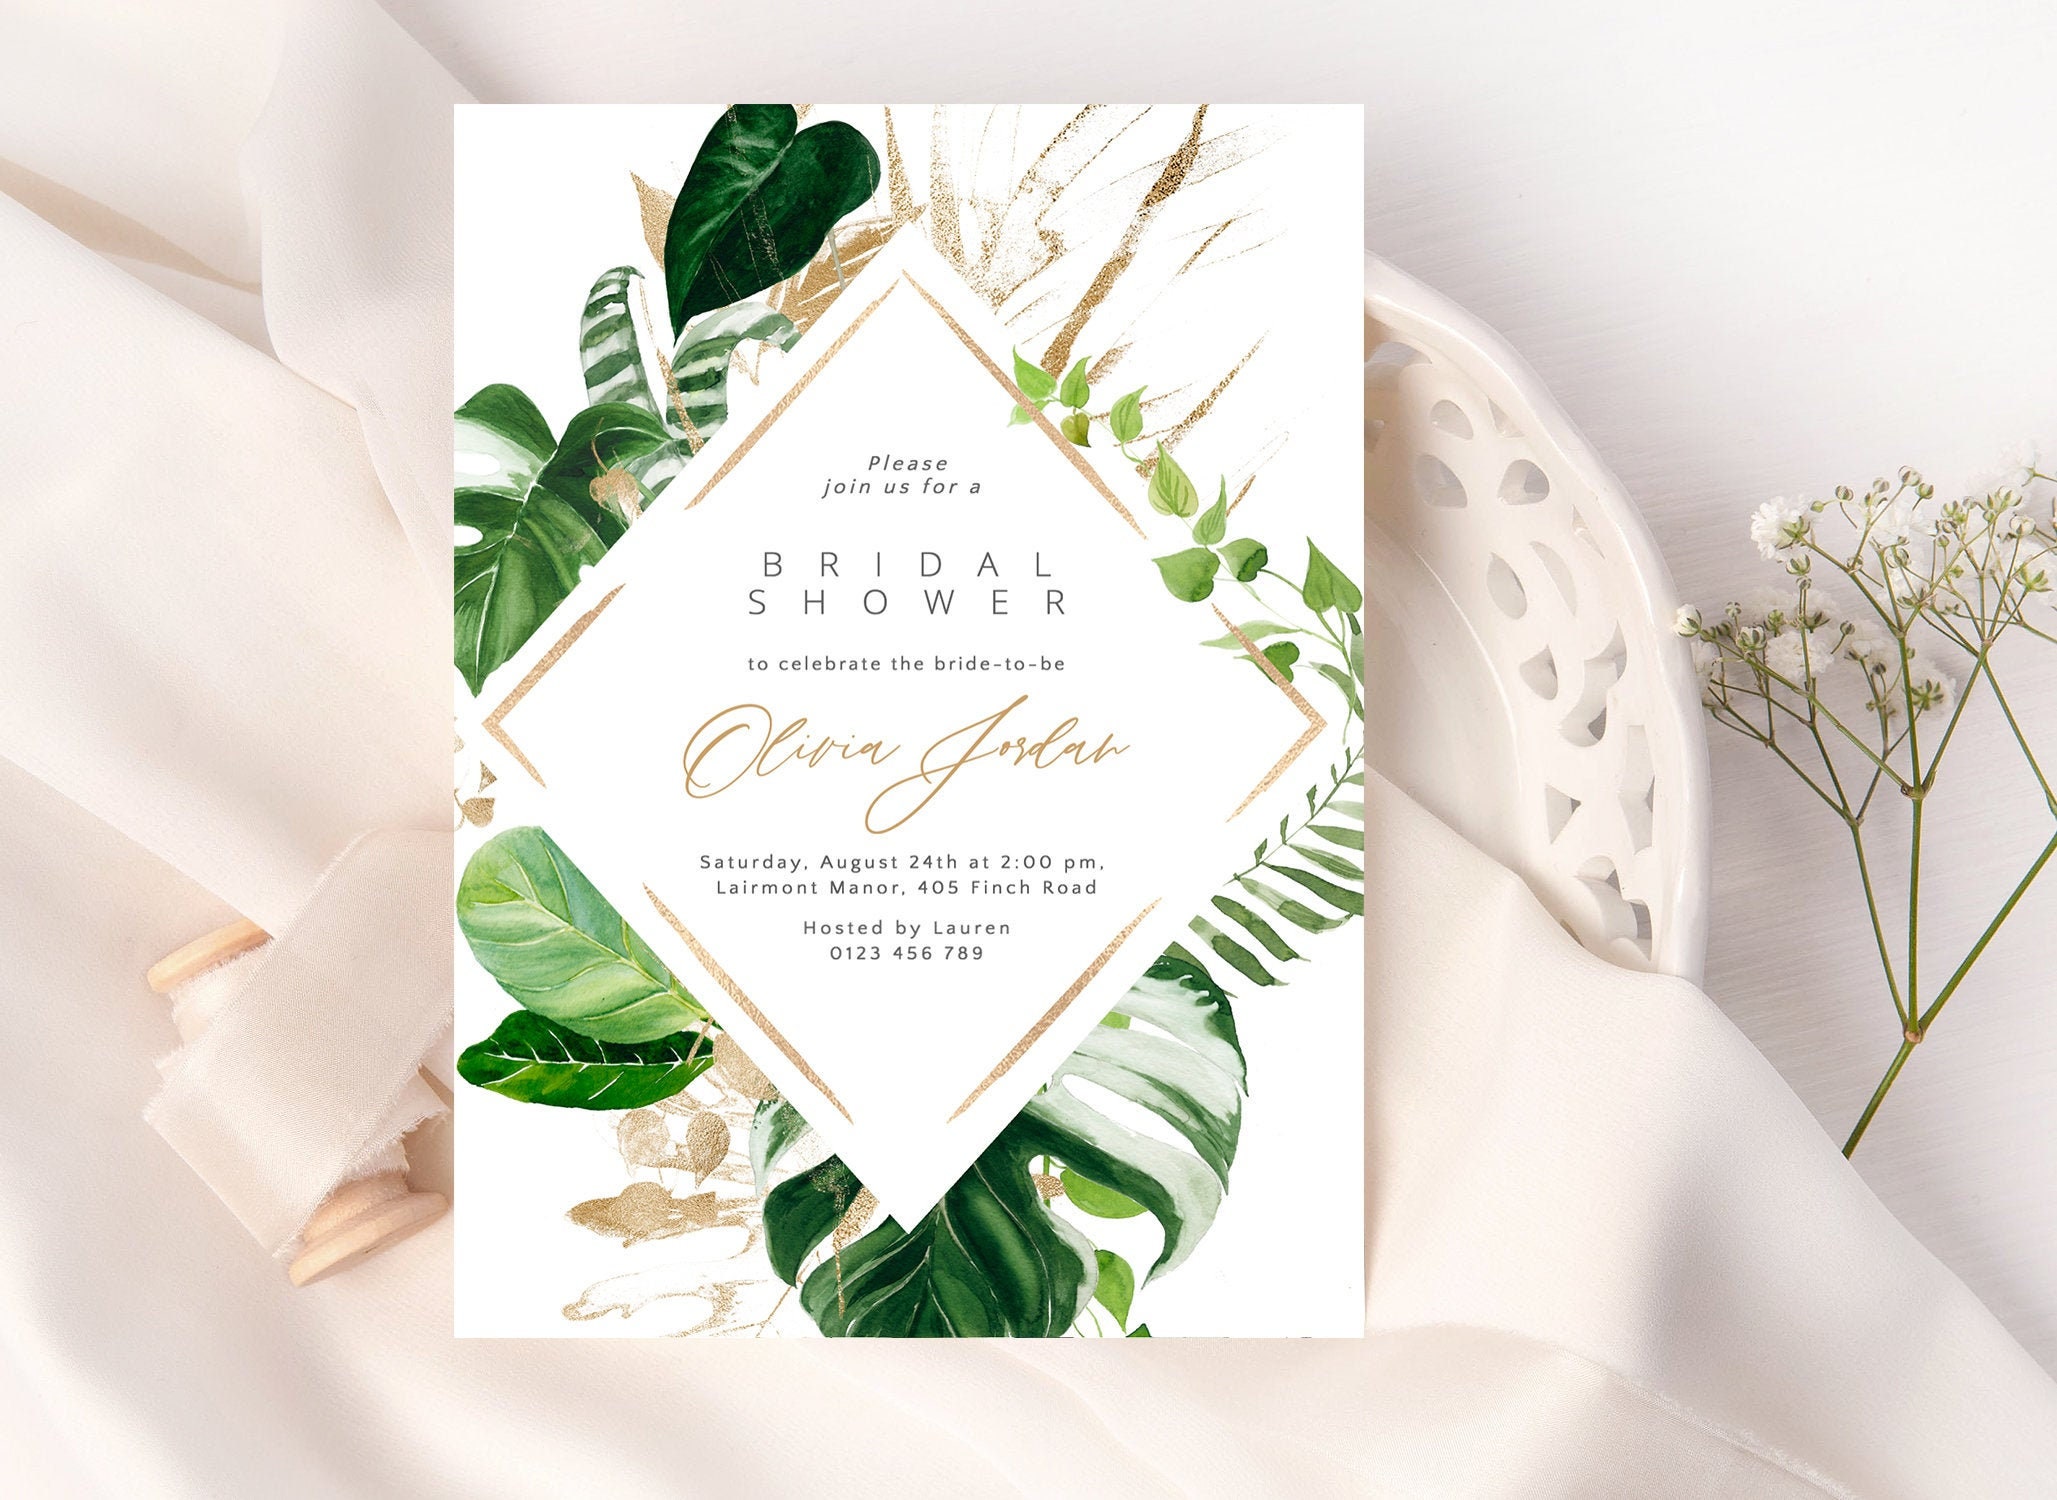 Bridal Shower Invitation Card Decorated With Wild Green - Etsy